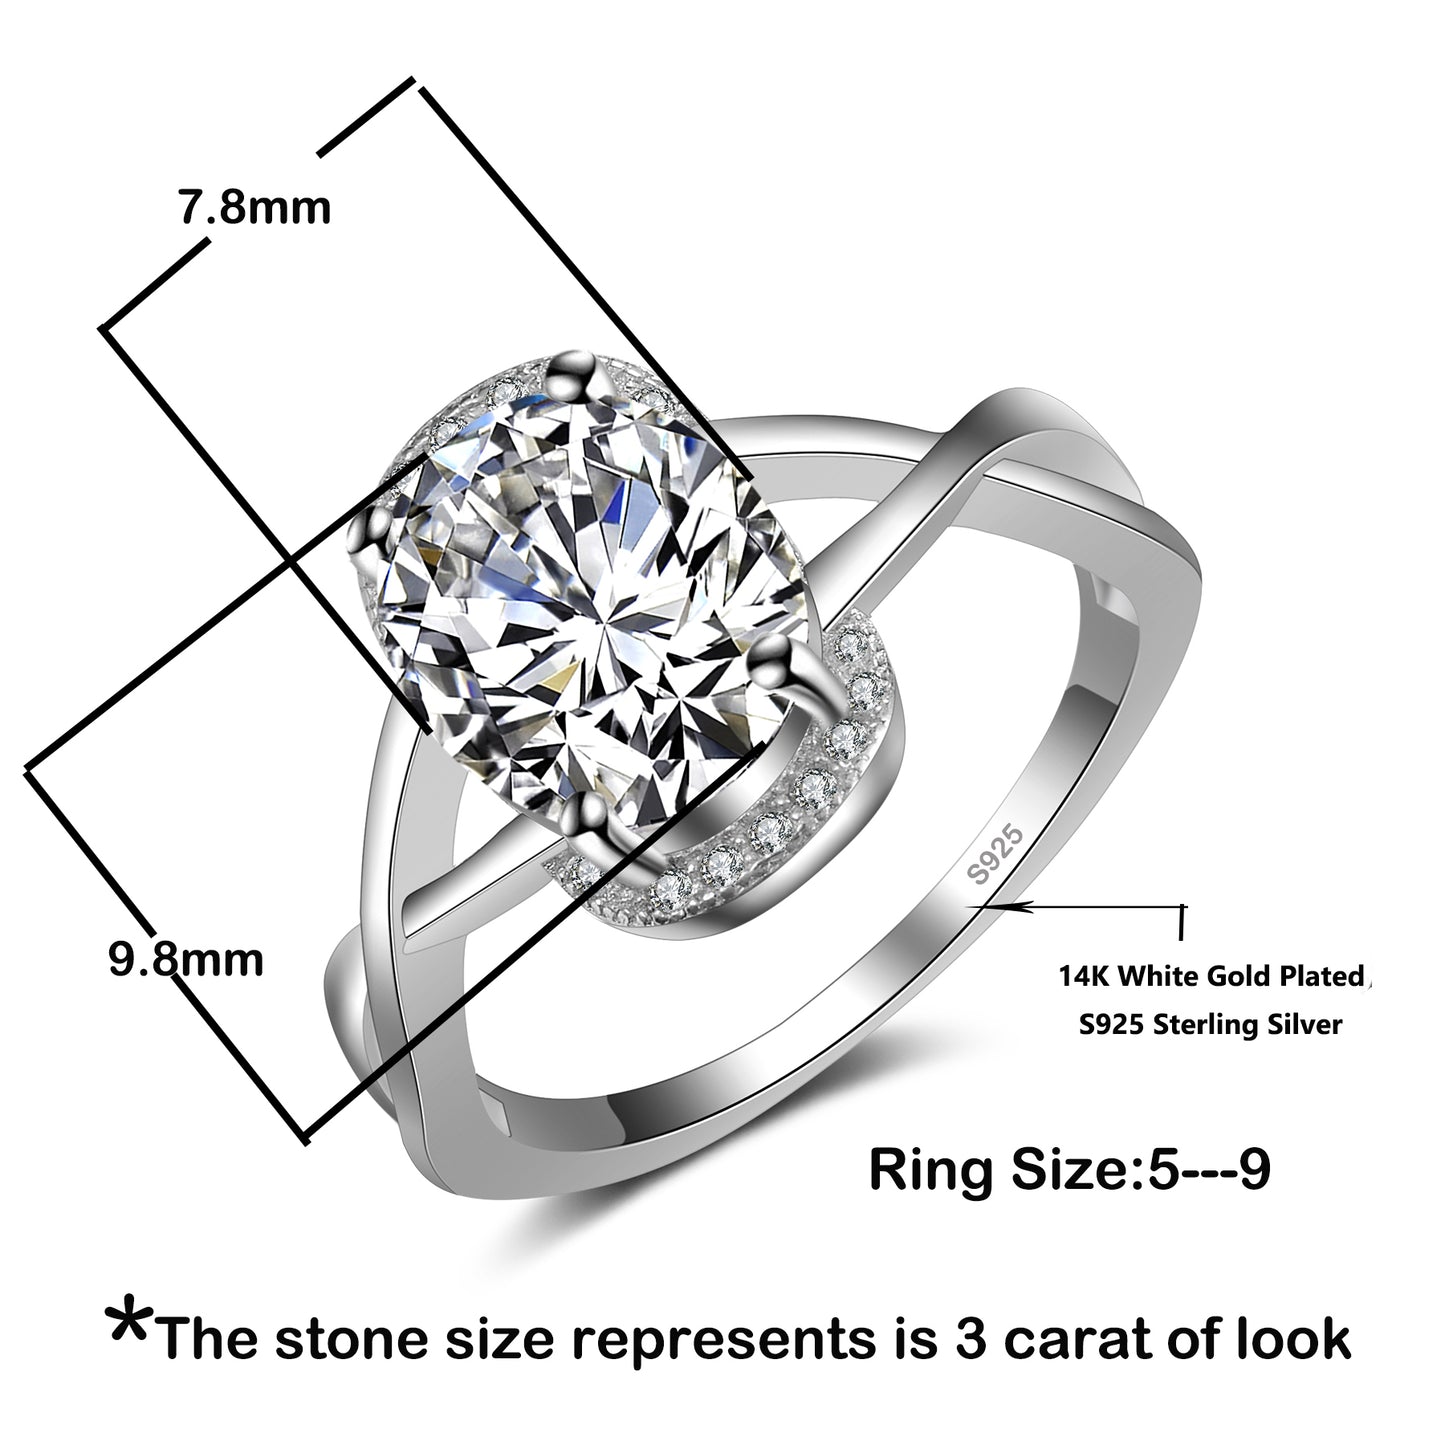 S925 Sterling Silver Ring Oval Shape Wedding Promise Ring